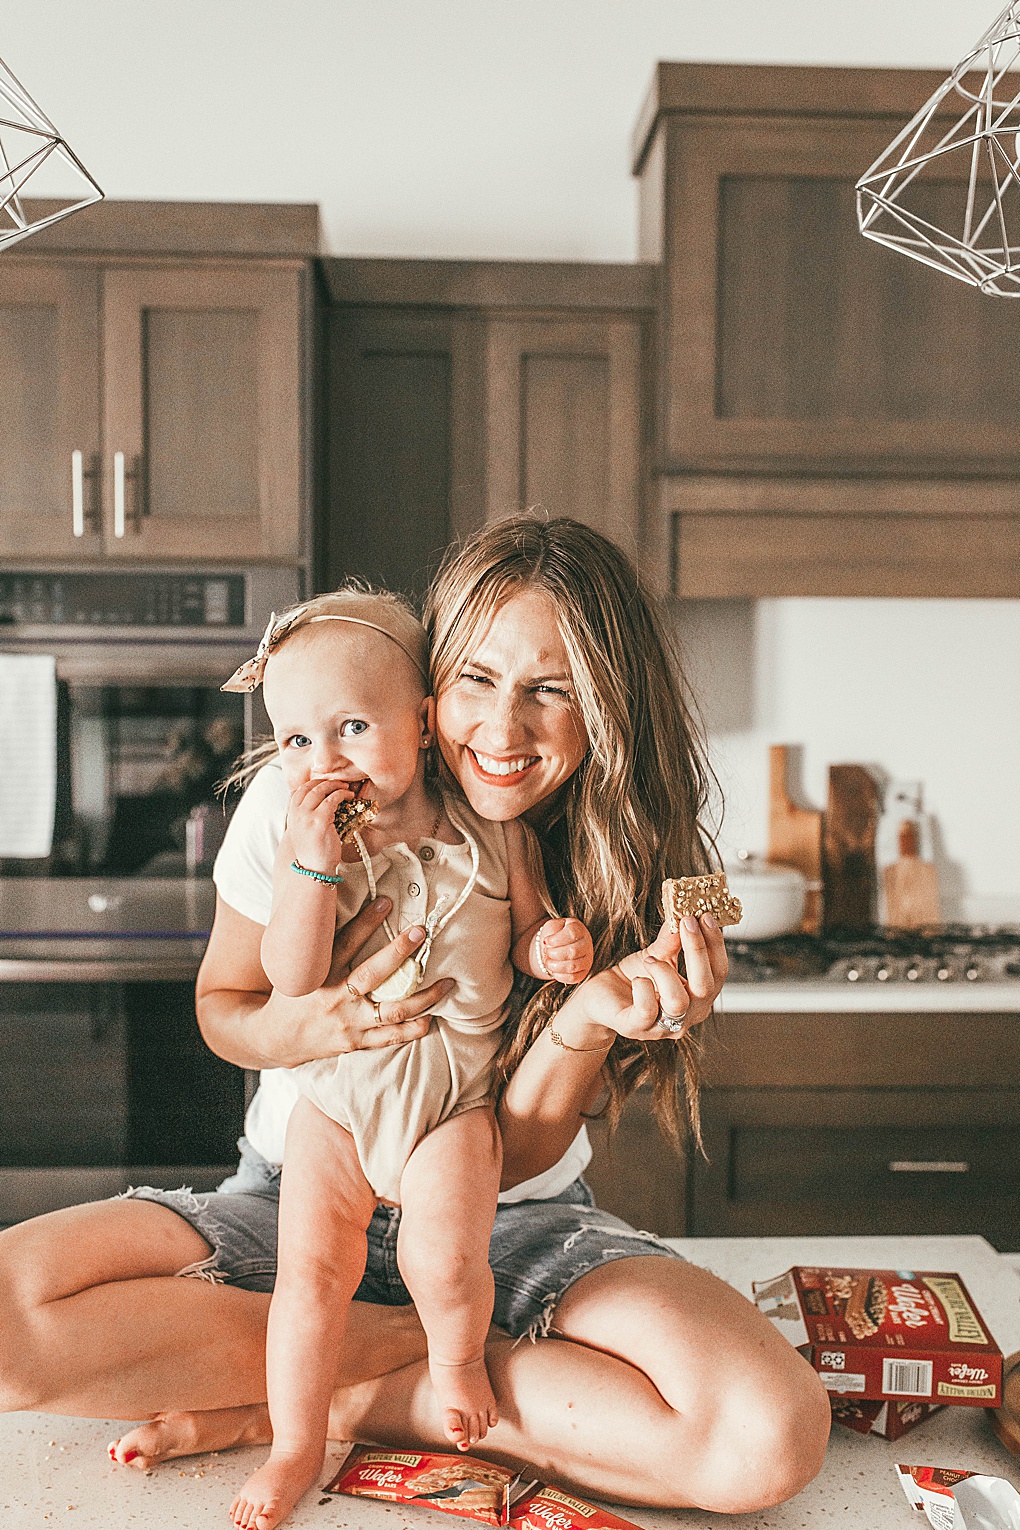 Curious how to simplify hectic mornings? Utah Style Blogger Dani Marie is sharing her top simple ways to simplify hectic mornings HERE!